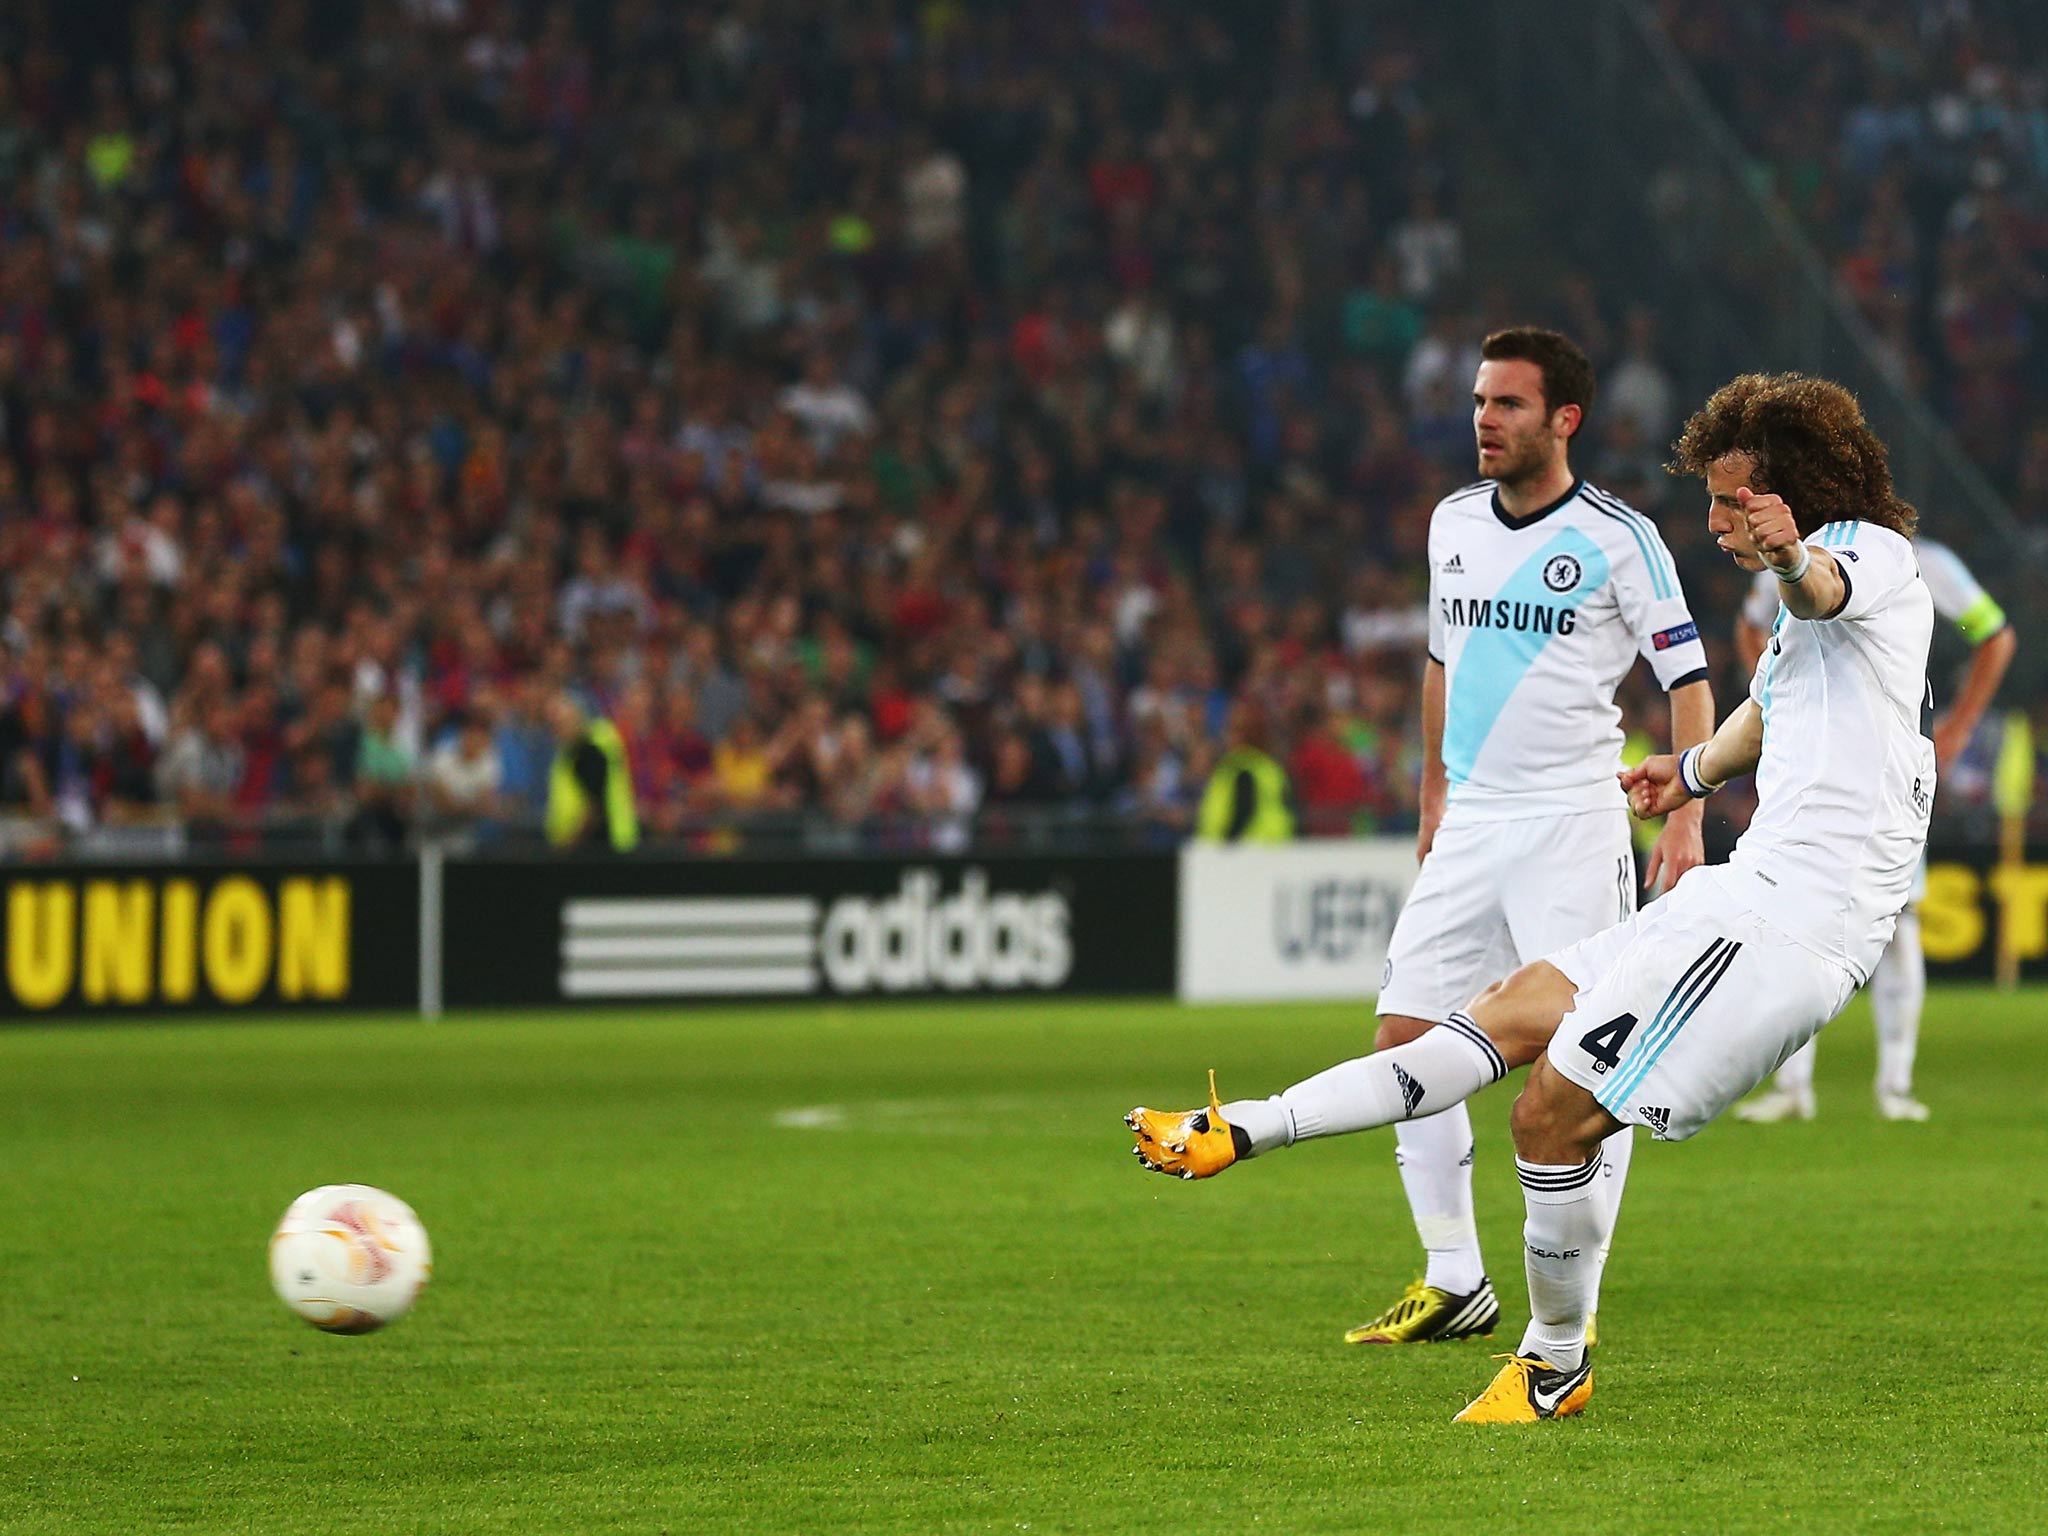 David Luiz strikes a late free-kick to make it 2-1 to Chelsea in their Europa tie with Basel